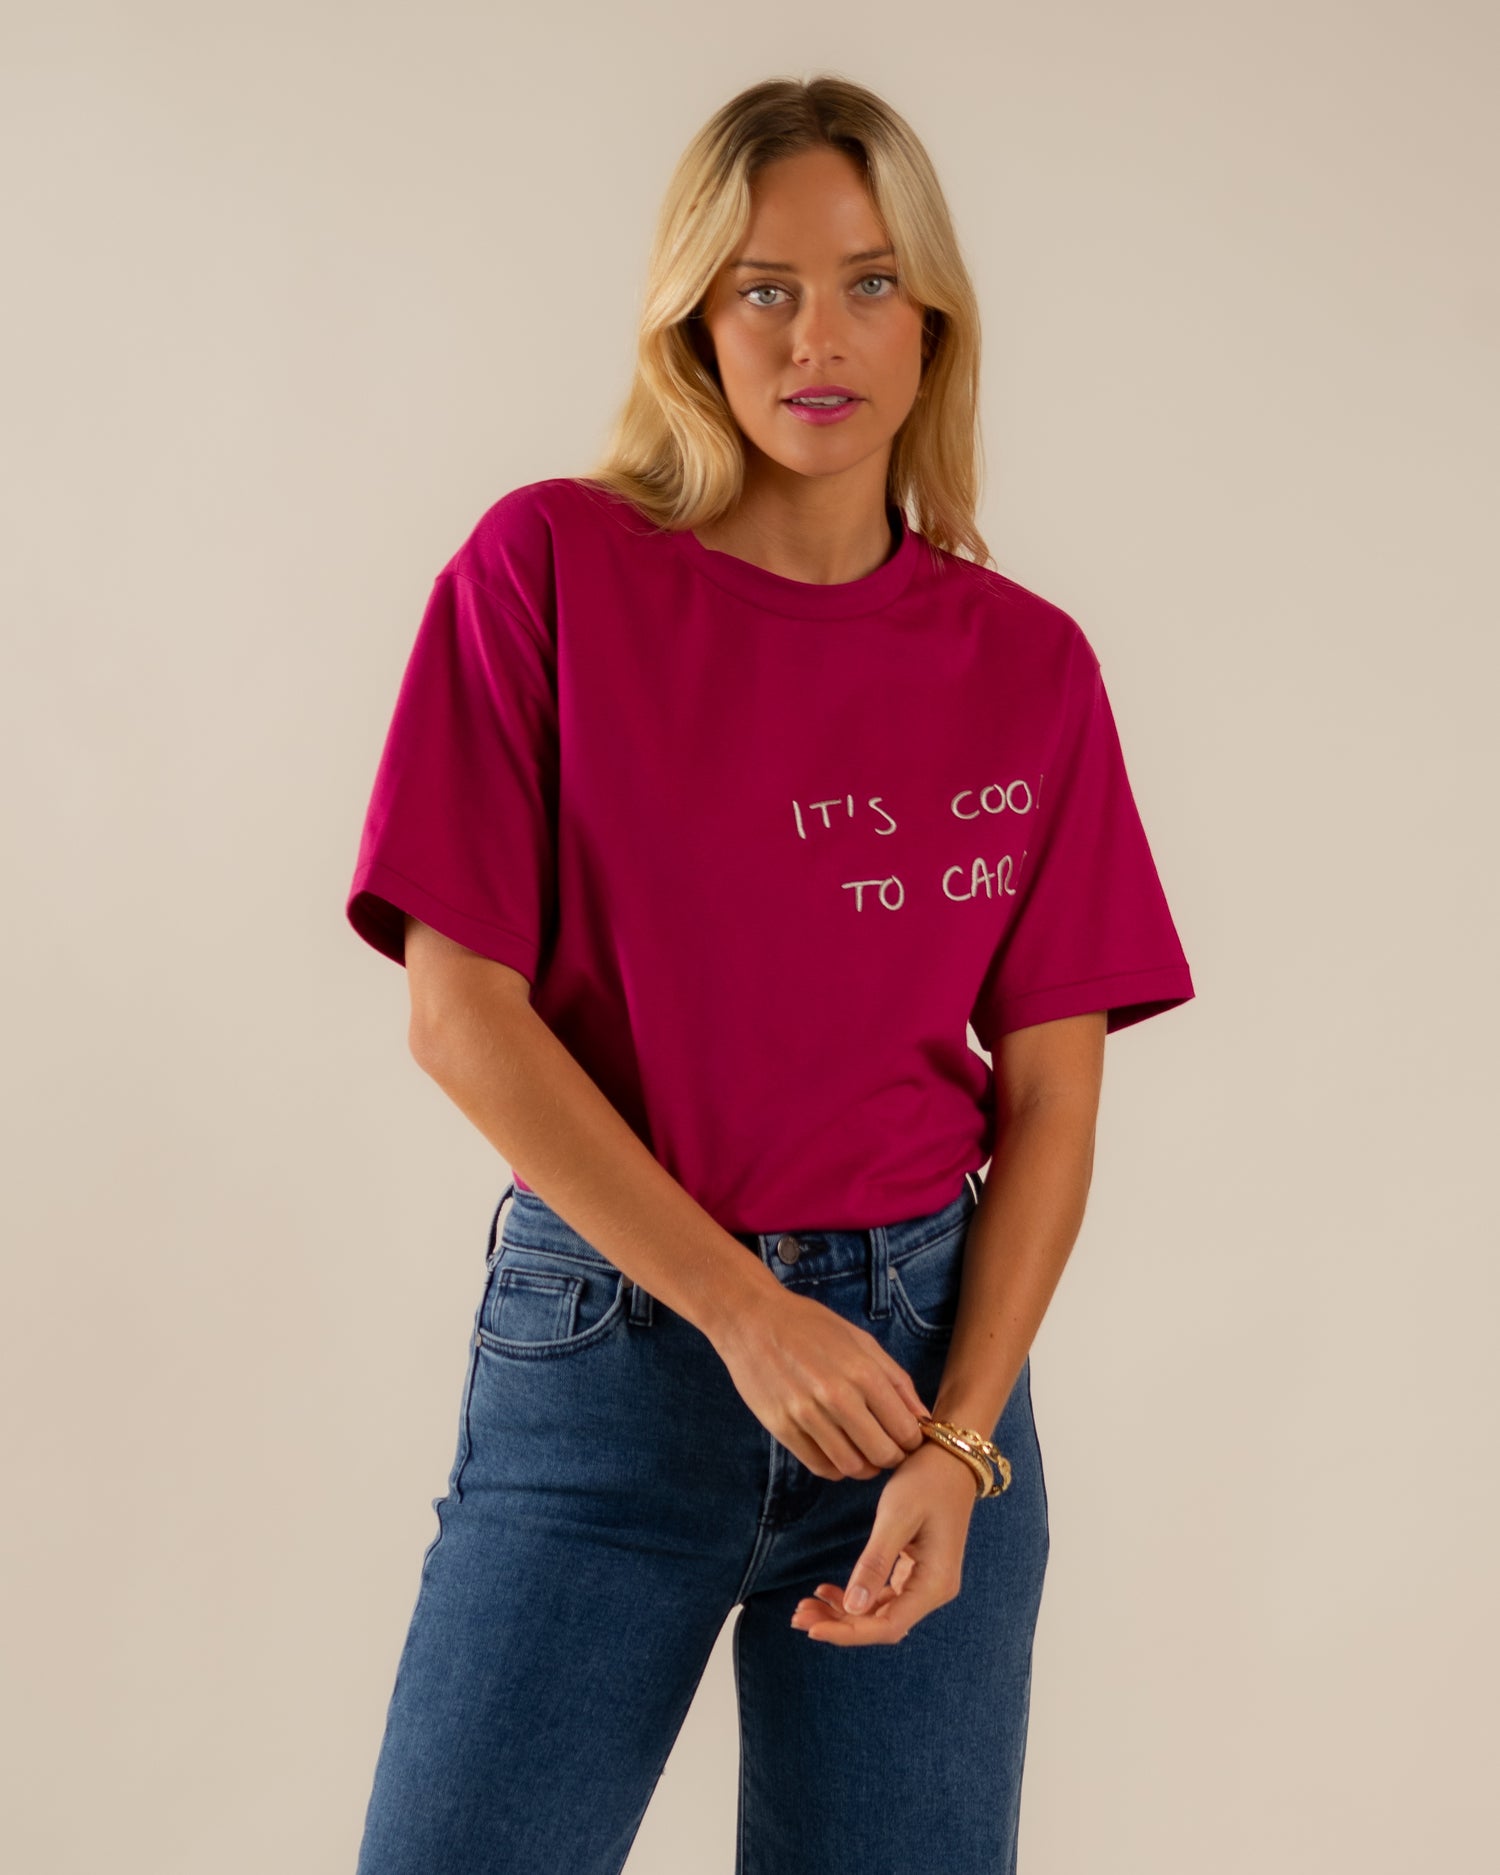 Marlie Embroidered Tee It's Cool To Care